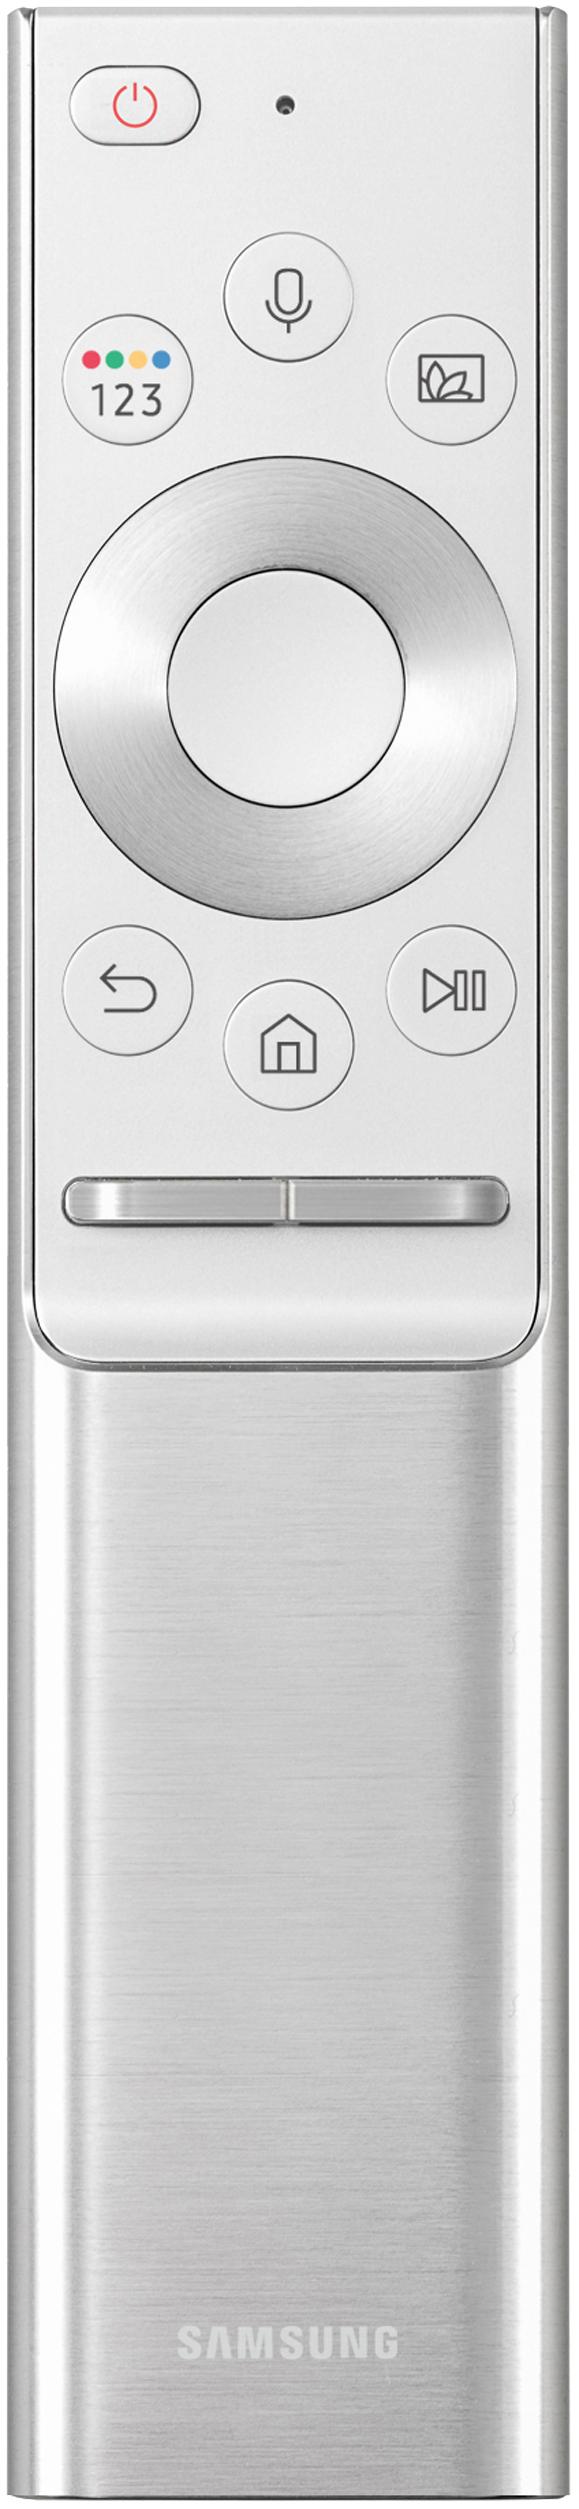 When you turn on the TV for the first time, the Samsung Smart Remote pairs to the TV automatically.